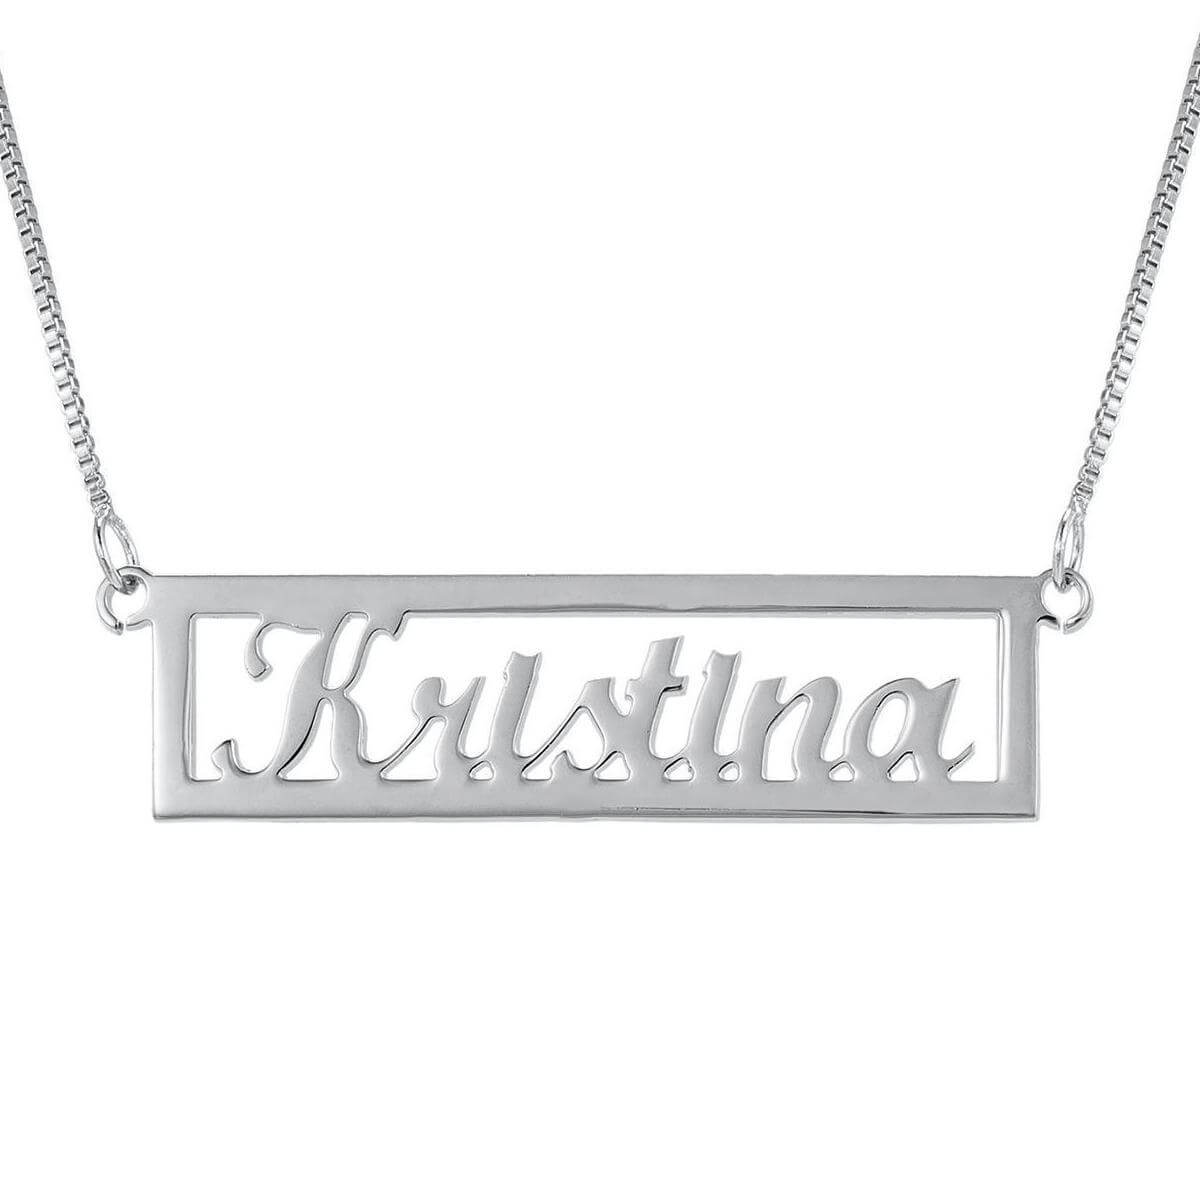 Dazzling Personalized Custom Framed Name Necklace